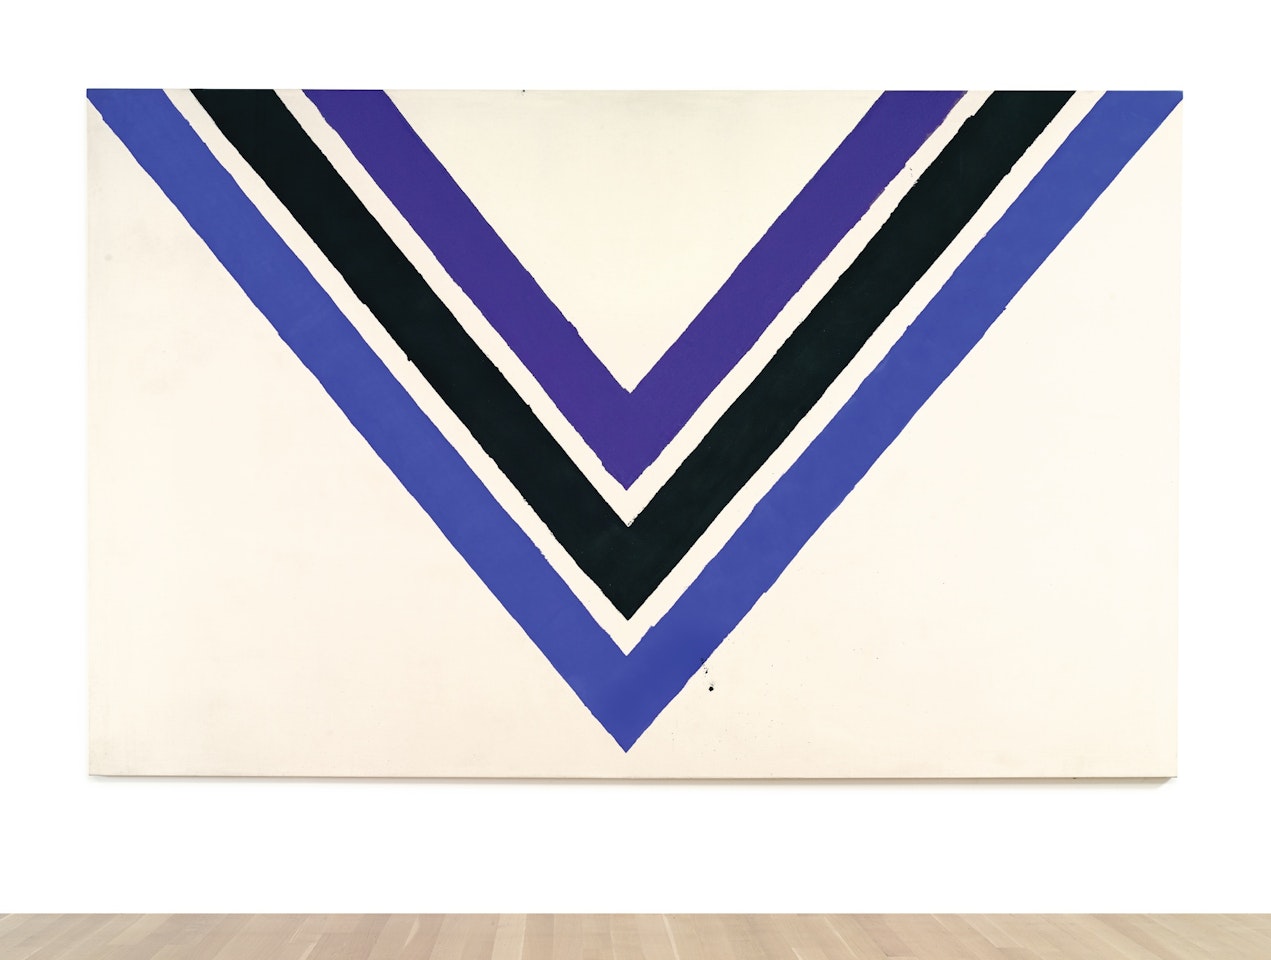 TRANS FLUX by Kenneth Noland